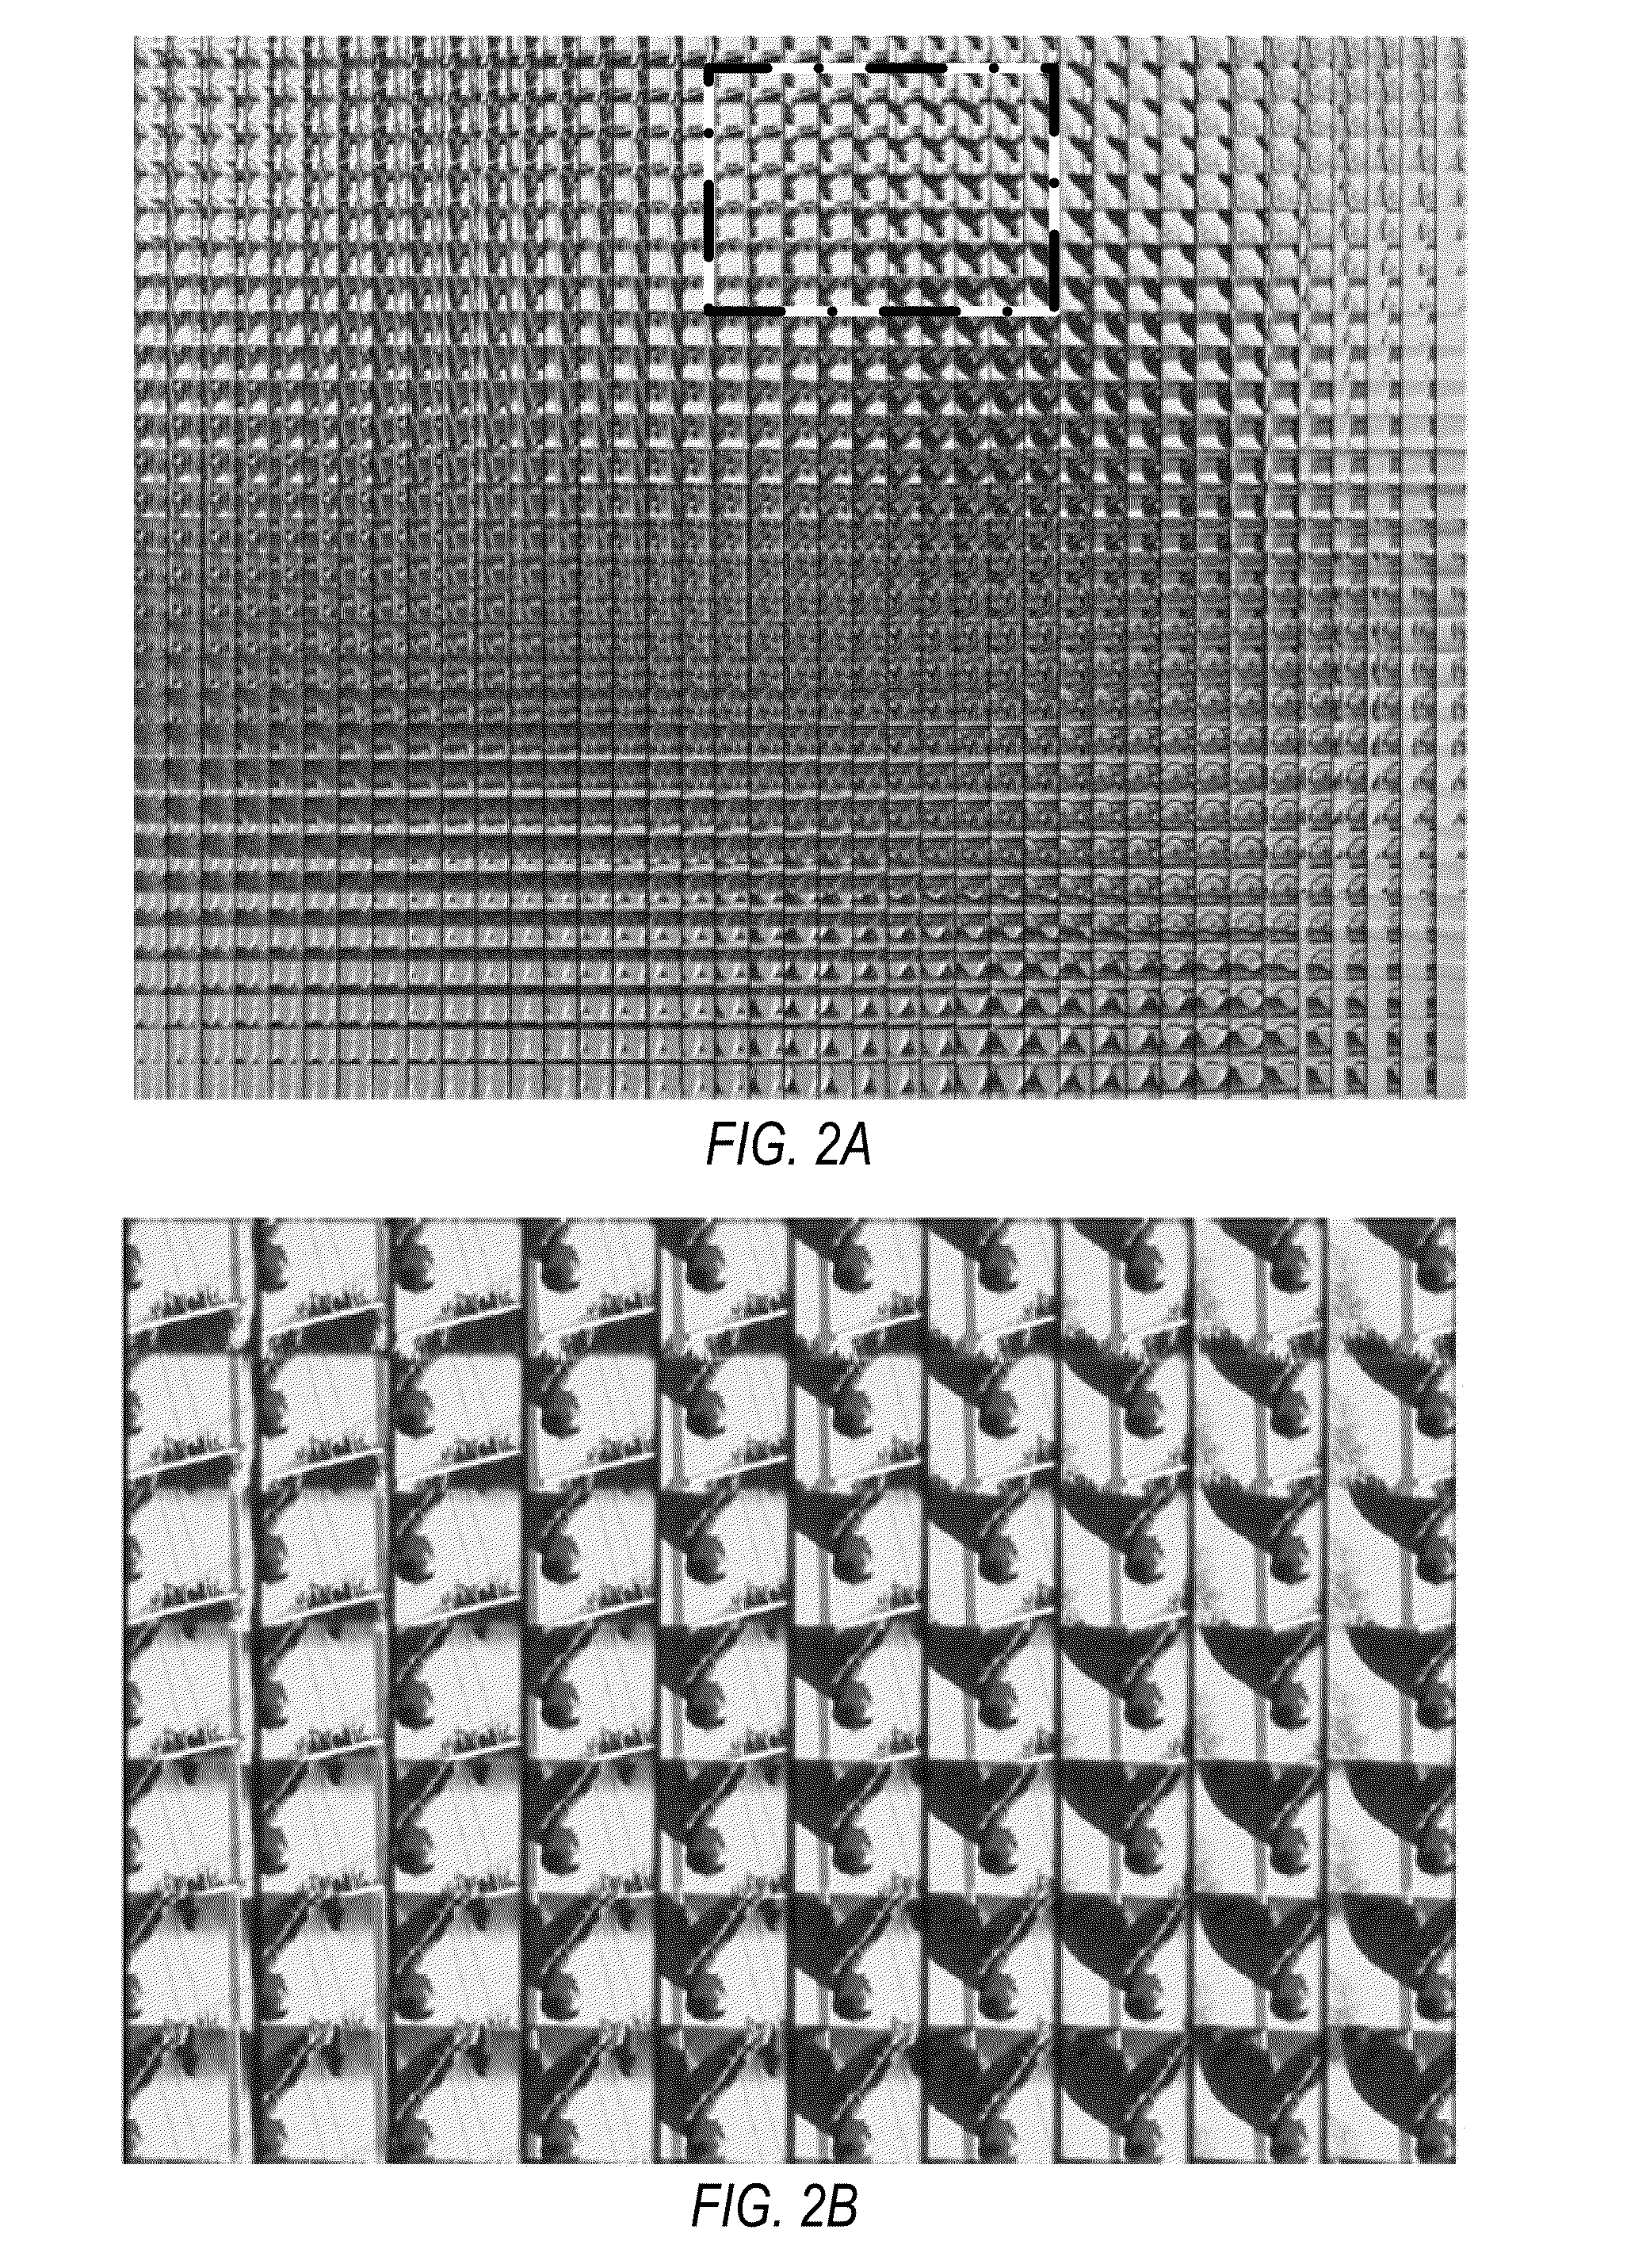 Methods and Apparatus for Rendering Output Images with Simulated Artistic Effects from Focused Plenoptic Camera Data